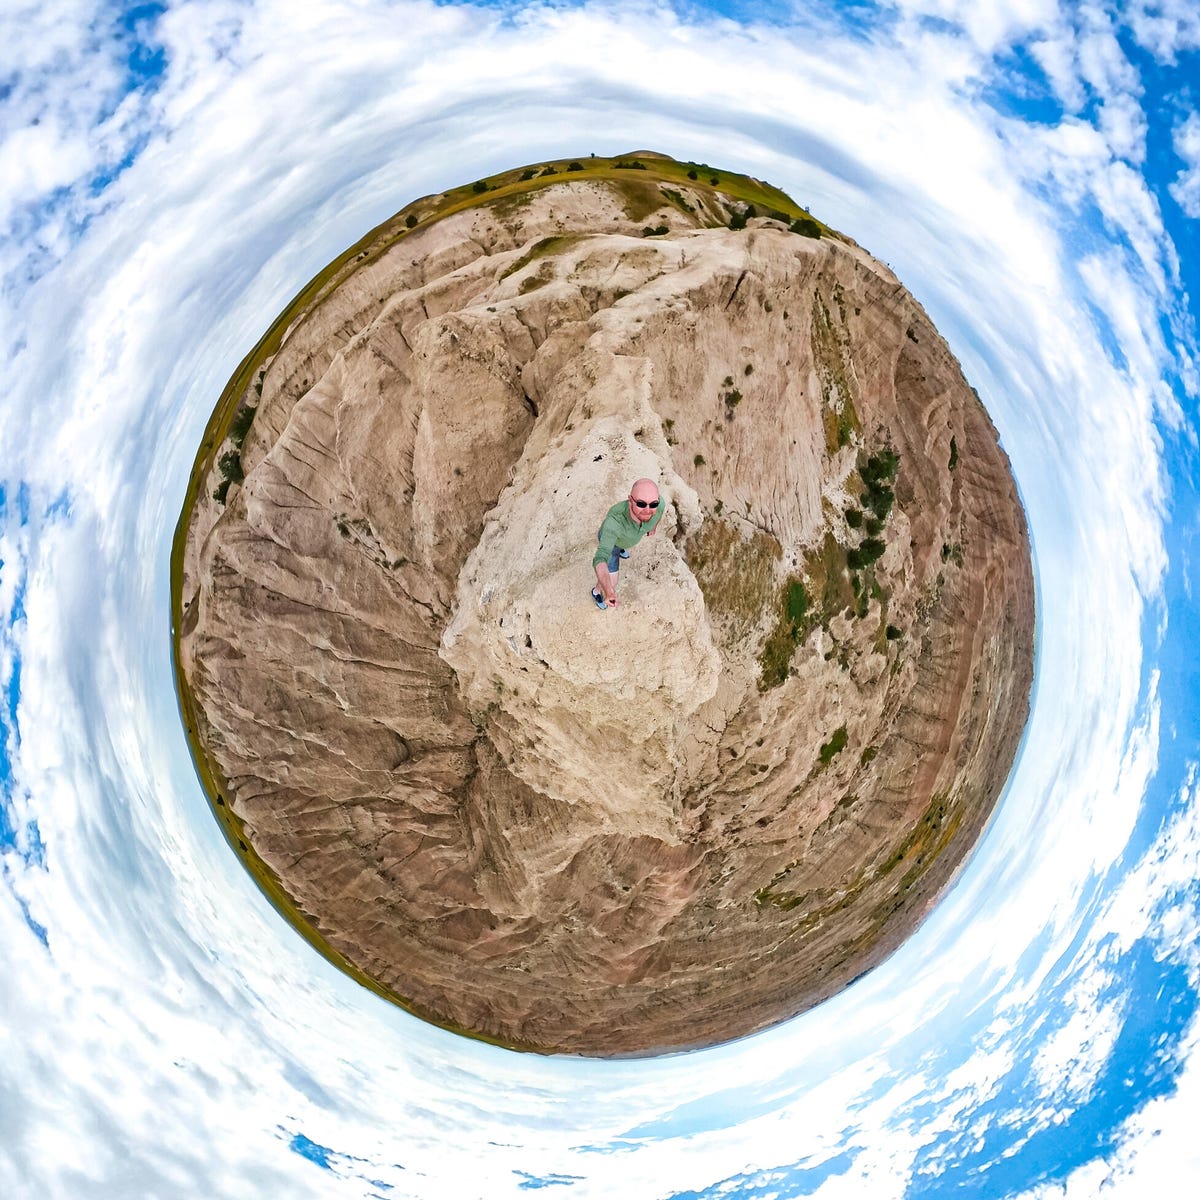 Precariously perched above the Badlands, thanks to a 360 camera and a selfie stick.